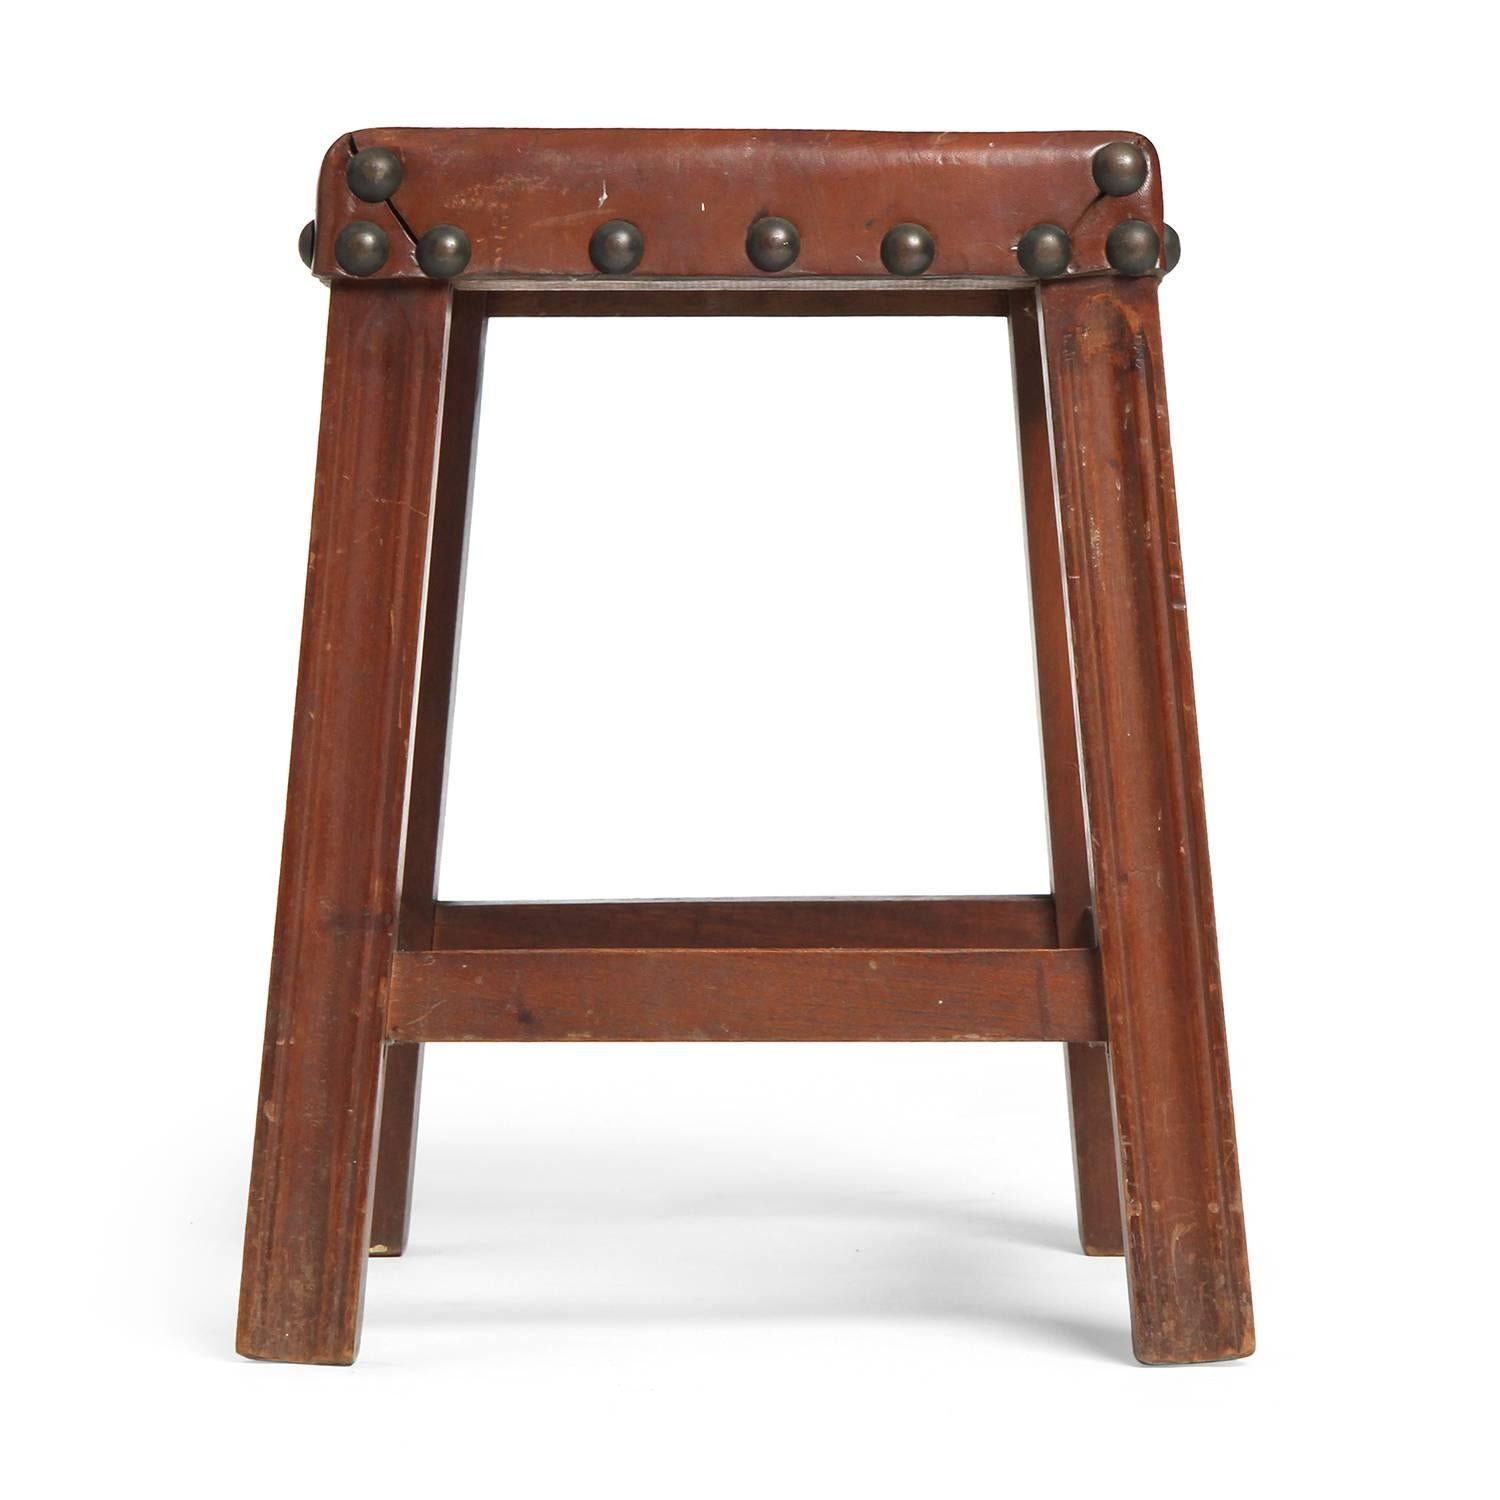 A substantial and finely executed low stool having a flaring square walnut frame and a thick burgundy leather seat with expressive nail head trim.